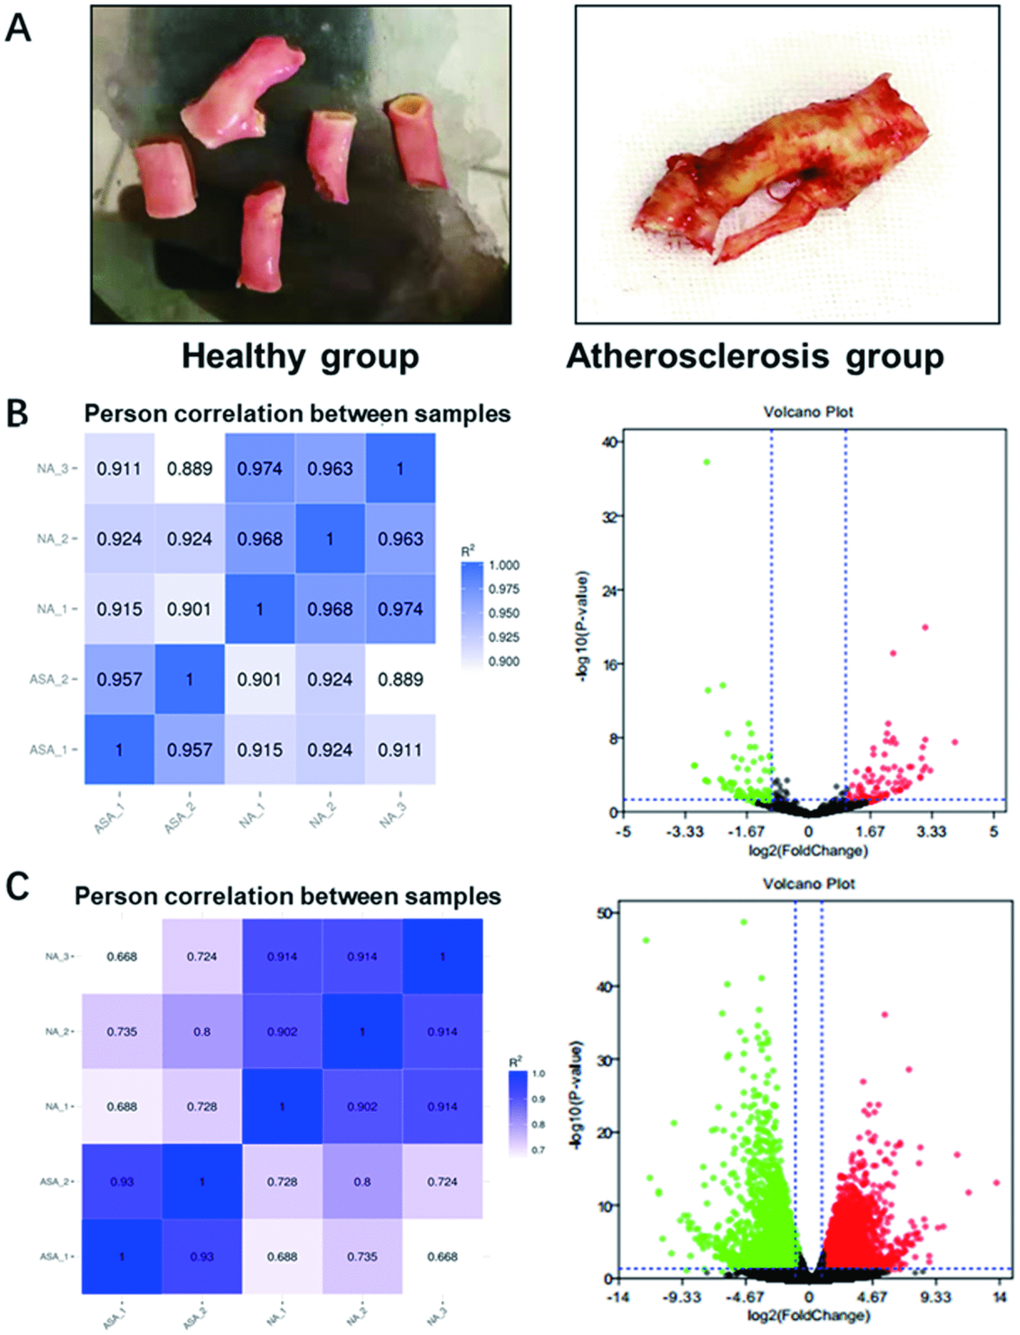 Photos of collected samples and RNA-sequencing analysis of differentially expressed miRNAs and mRNAs in atherosclerosis. (A) The normal carotid artery from patients with accident (Healthy group) and atherosclerotic plaque collected from patients with atherosclerosis (Atherosclerosis) were photo’d by cellphone. (B) The heat map (Left panel) and volcano plot (Right panel) of differentially expressed miRNAs and (C) mRNAs in atherosclerosis by RNA-sequencing. Red plots stand for upregulated genes and green ones represent downregulated genes with absolute log2FC>1 and P 